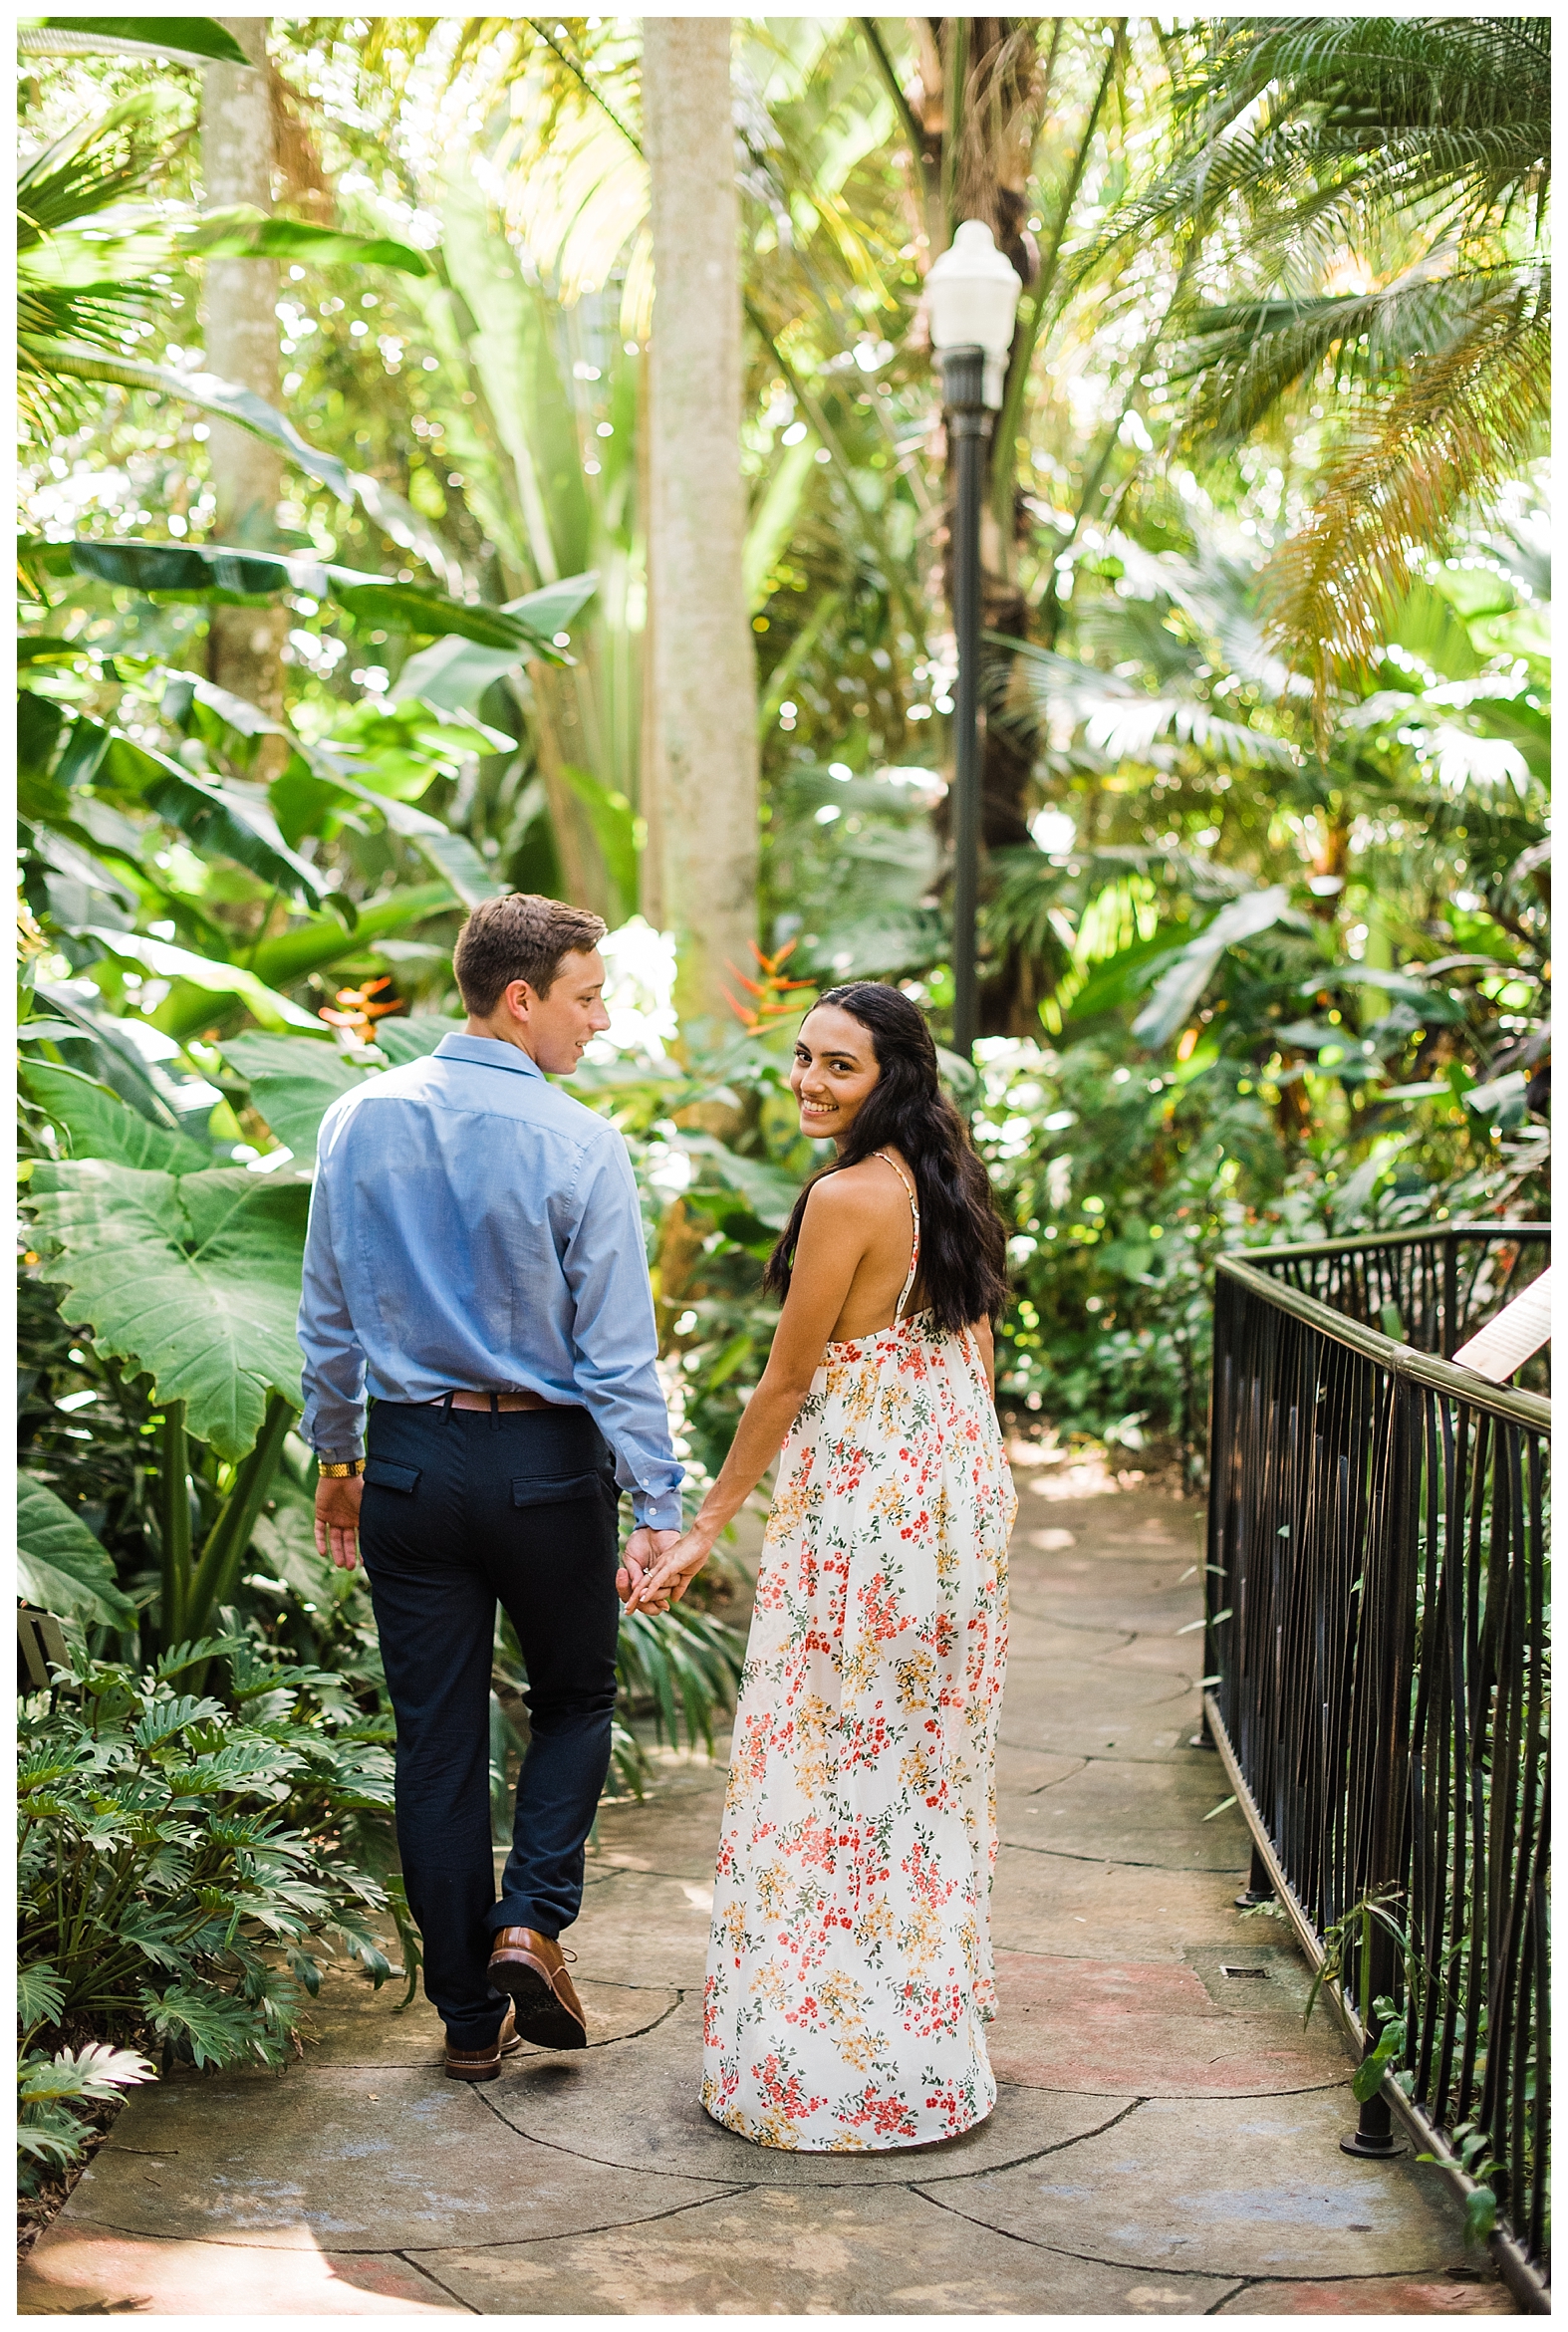 couple poses, bride looking back, bright wedding photographer, bright engagement photographer, couple poses, candid couple poses, candid poses, st petersburg engagement, st petersburg engagement session, st petersburg wedding photographer, st petersburg photographer, st petersburg wedding photographer, luxury wedding photographer, traveling wedding photographer, traveling engagement photographer, floral engagement dress, maxi dress, long engagement dress, long floral maxi dress, engagement session outfit